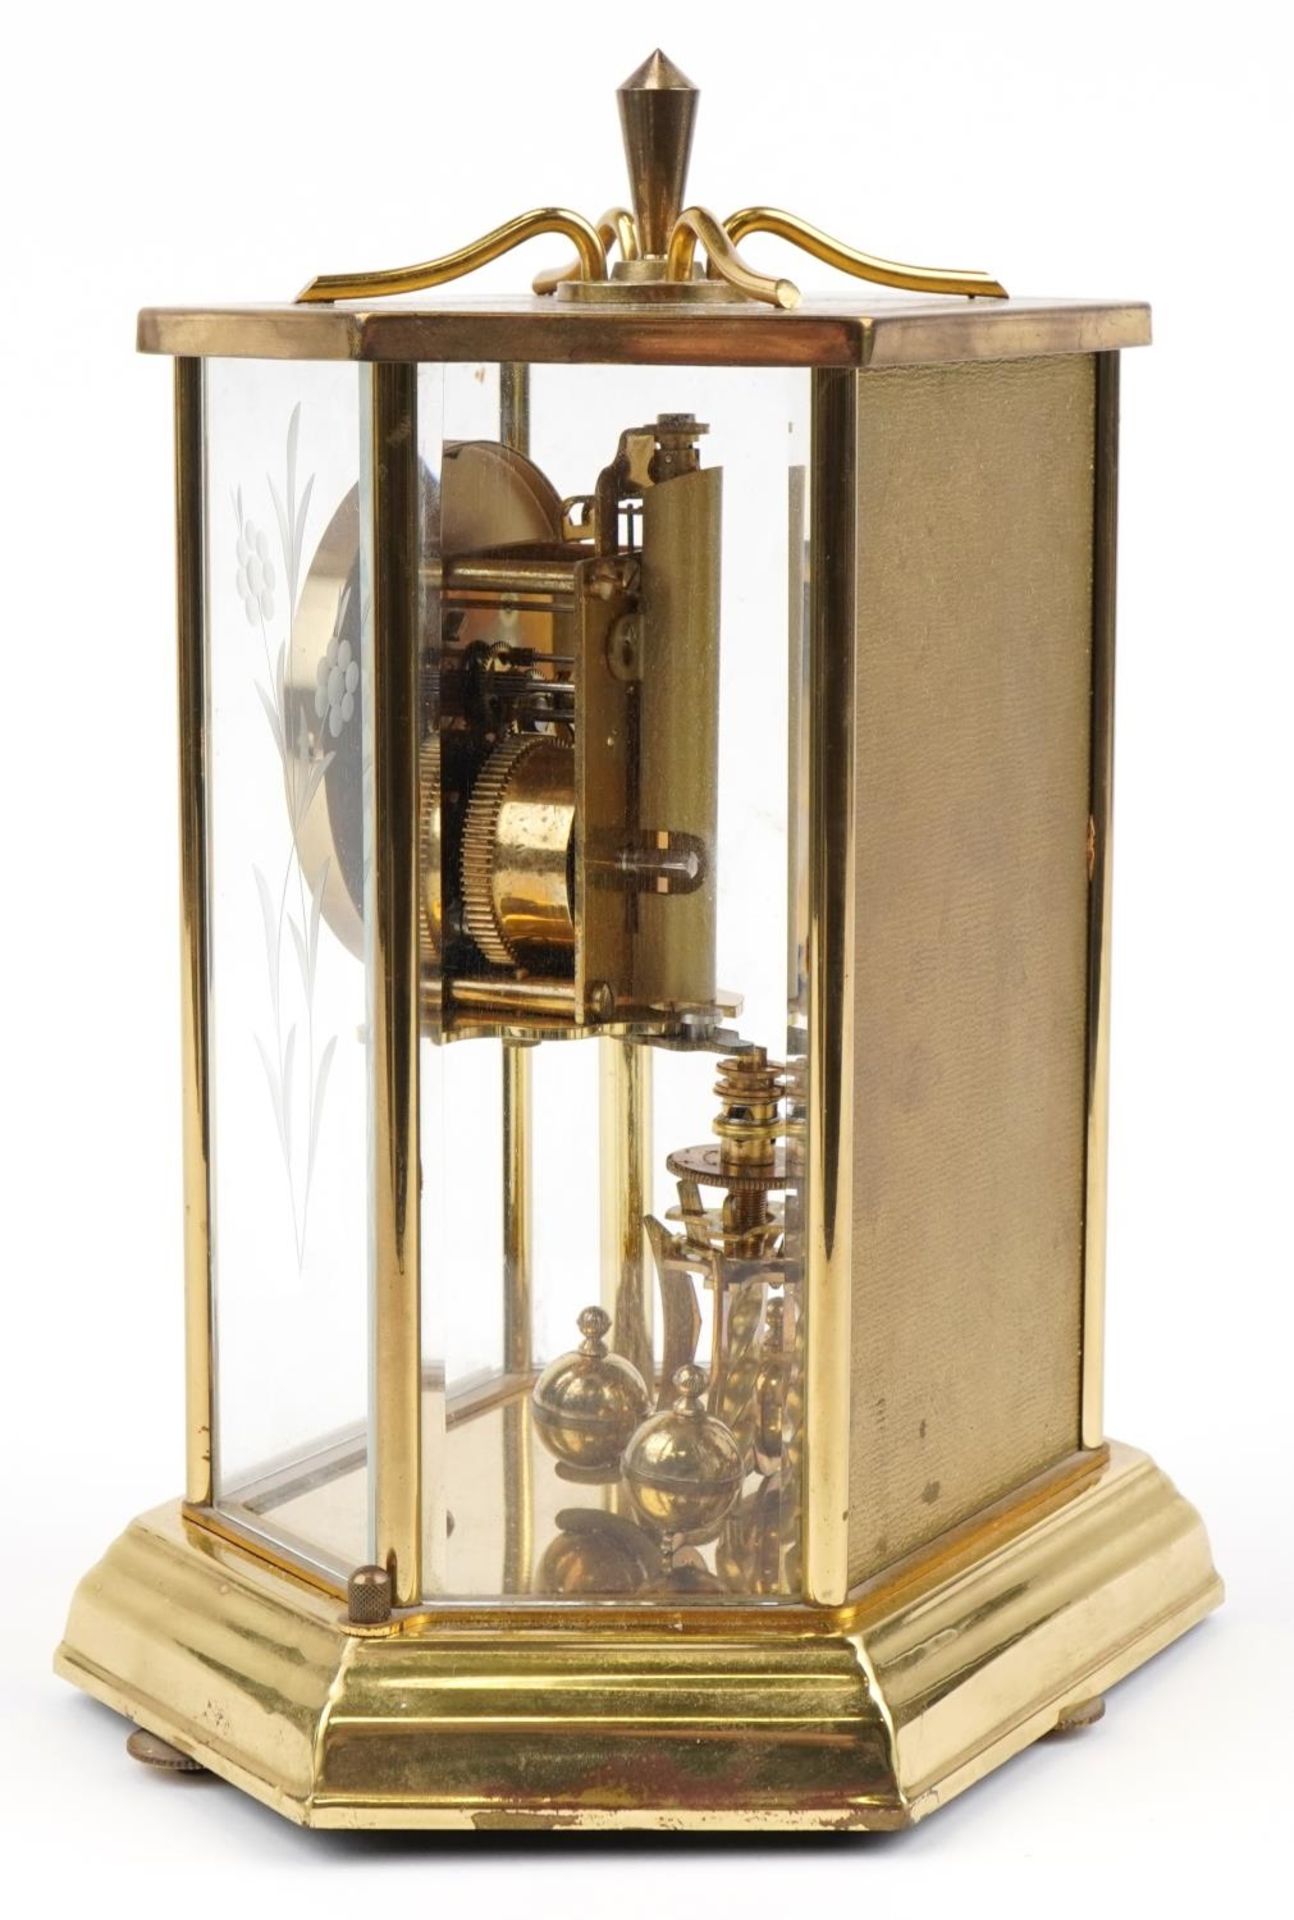 Kundo brass cased anniversary clock with bevelled glass panels, 25.5cm high : For further - Image 3 of 4